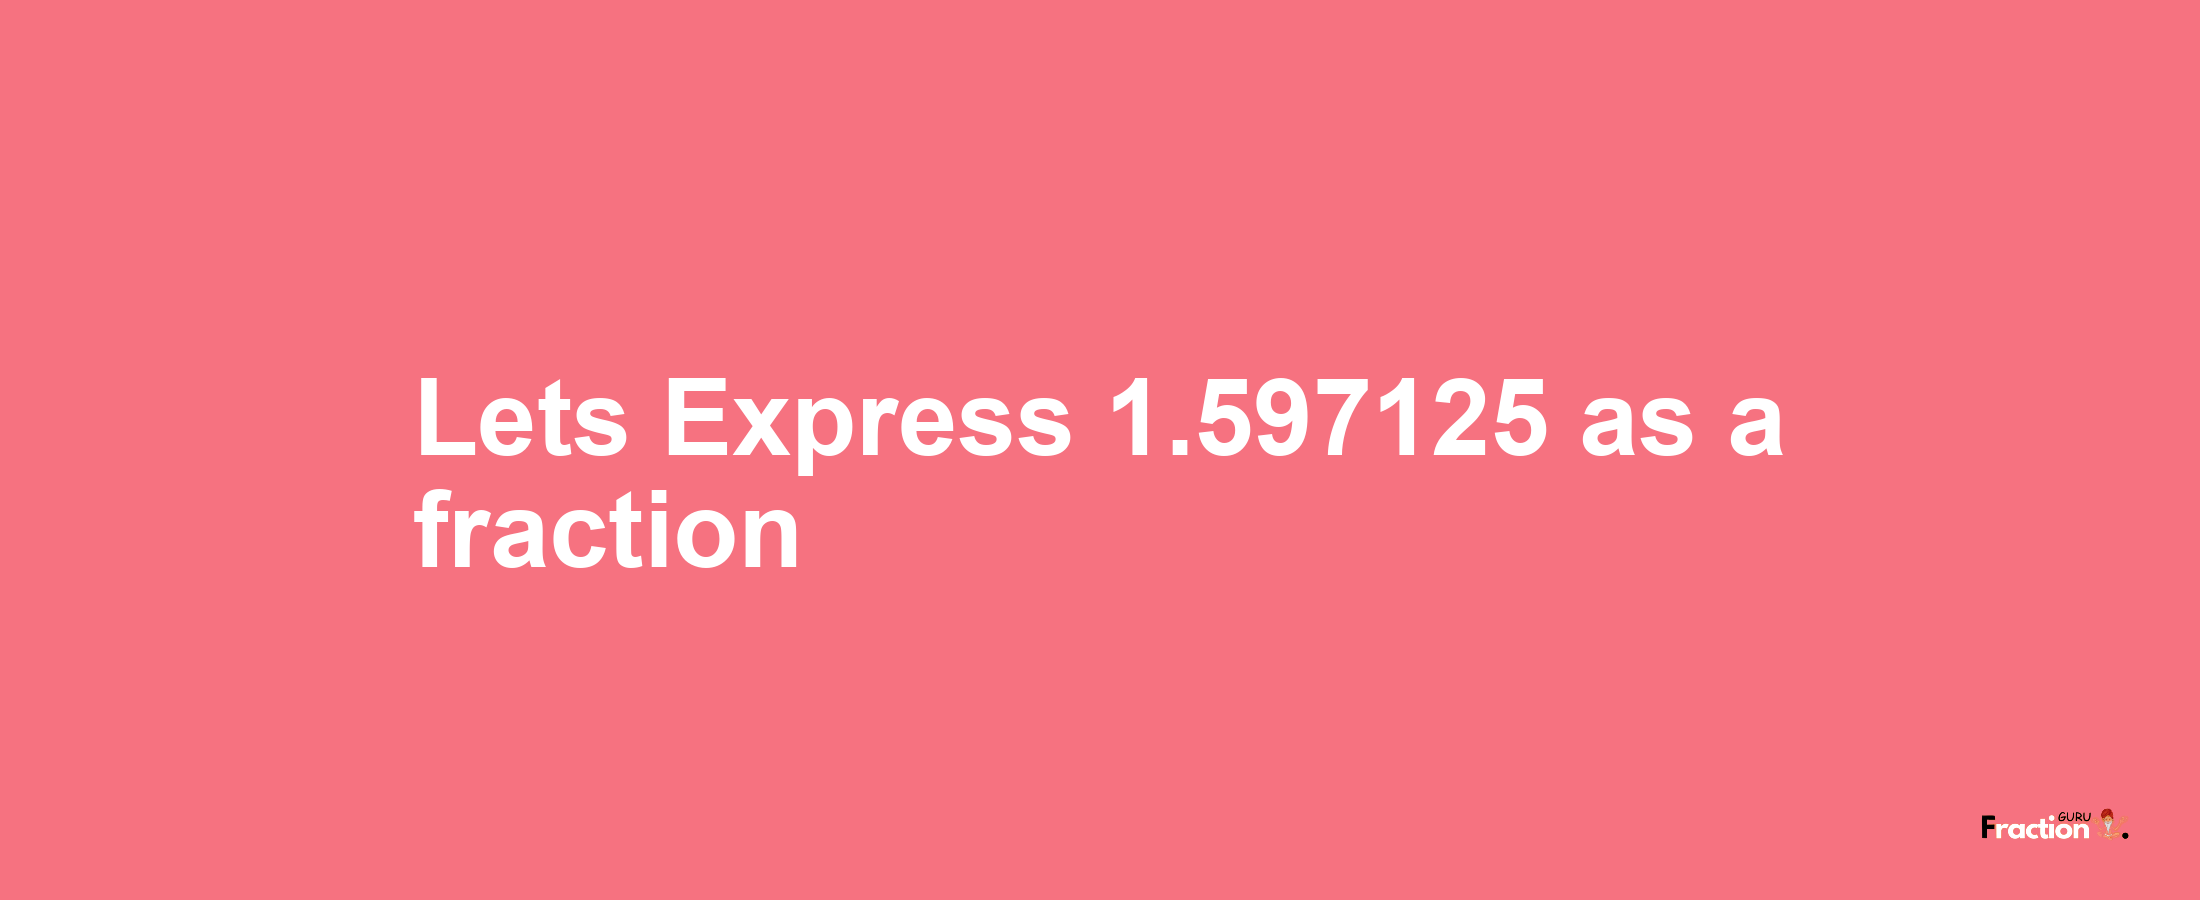 Lets Express 1.597125 as afraction